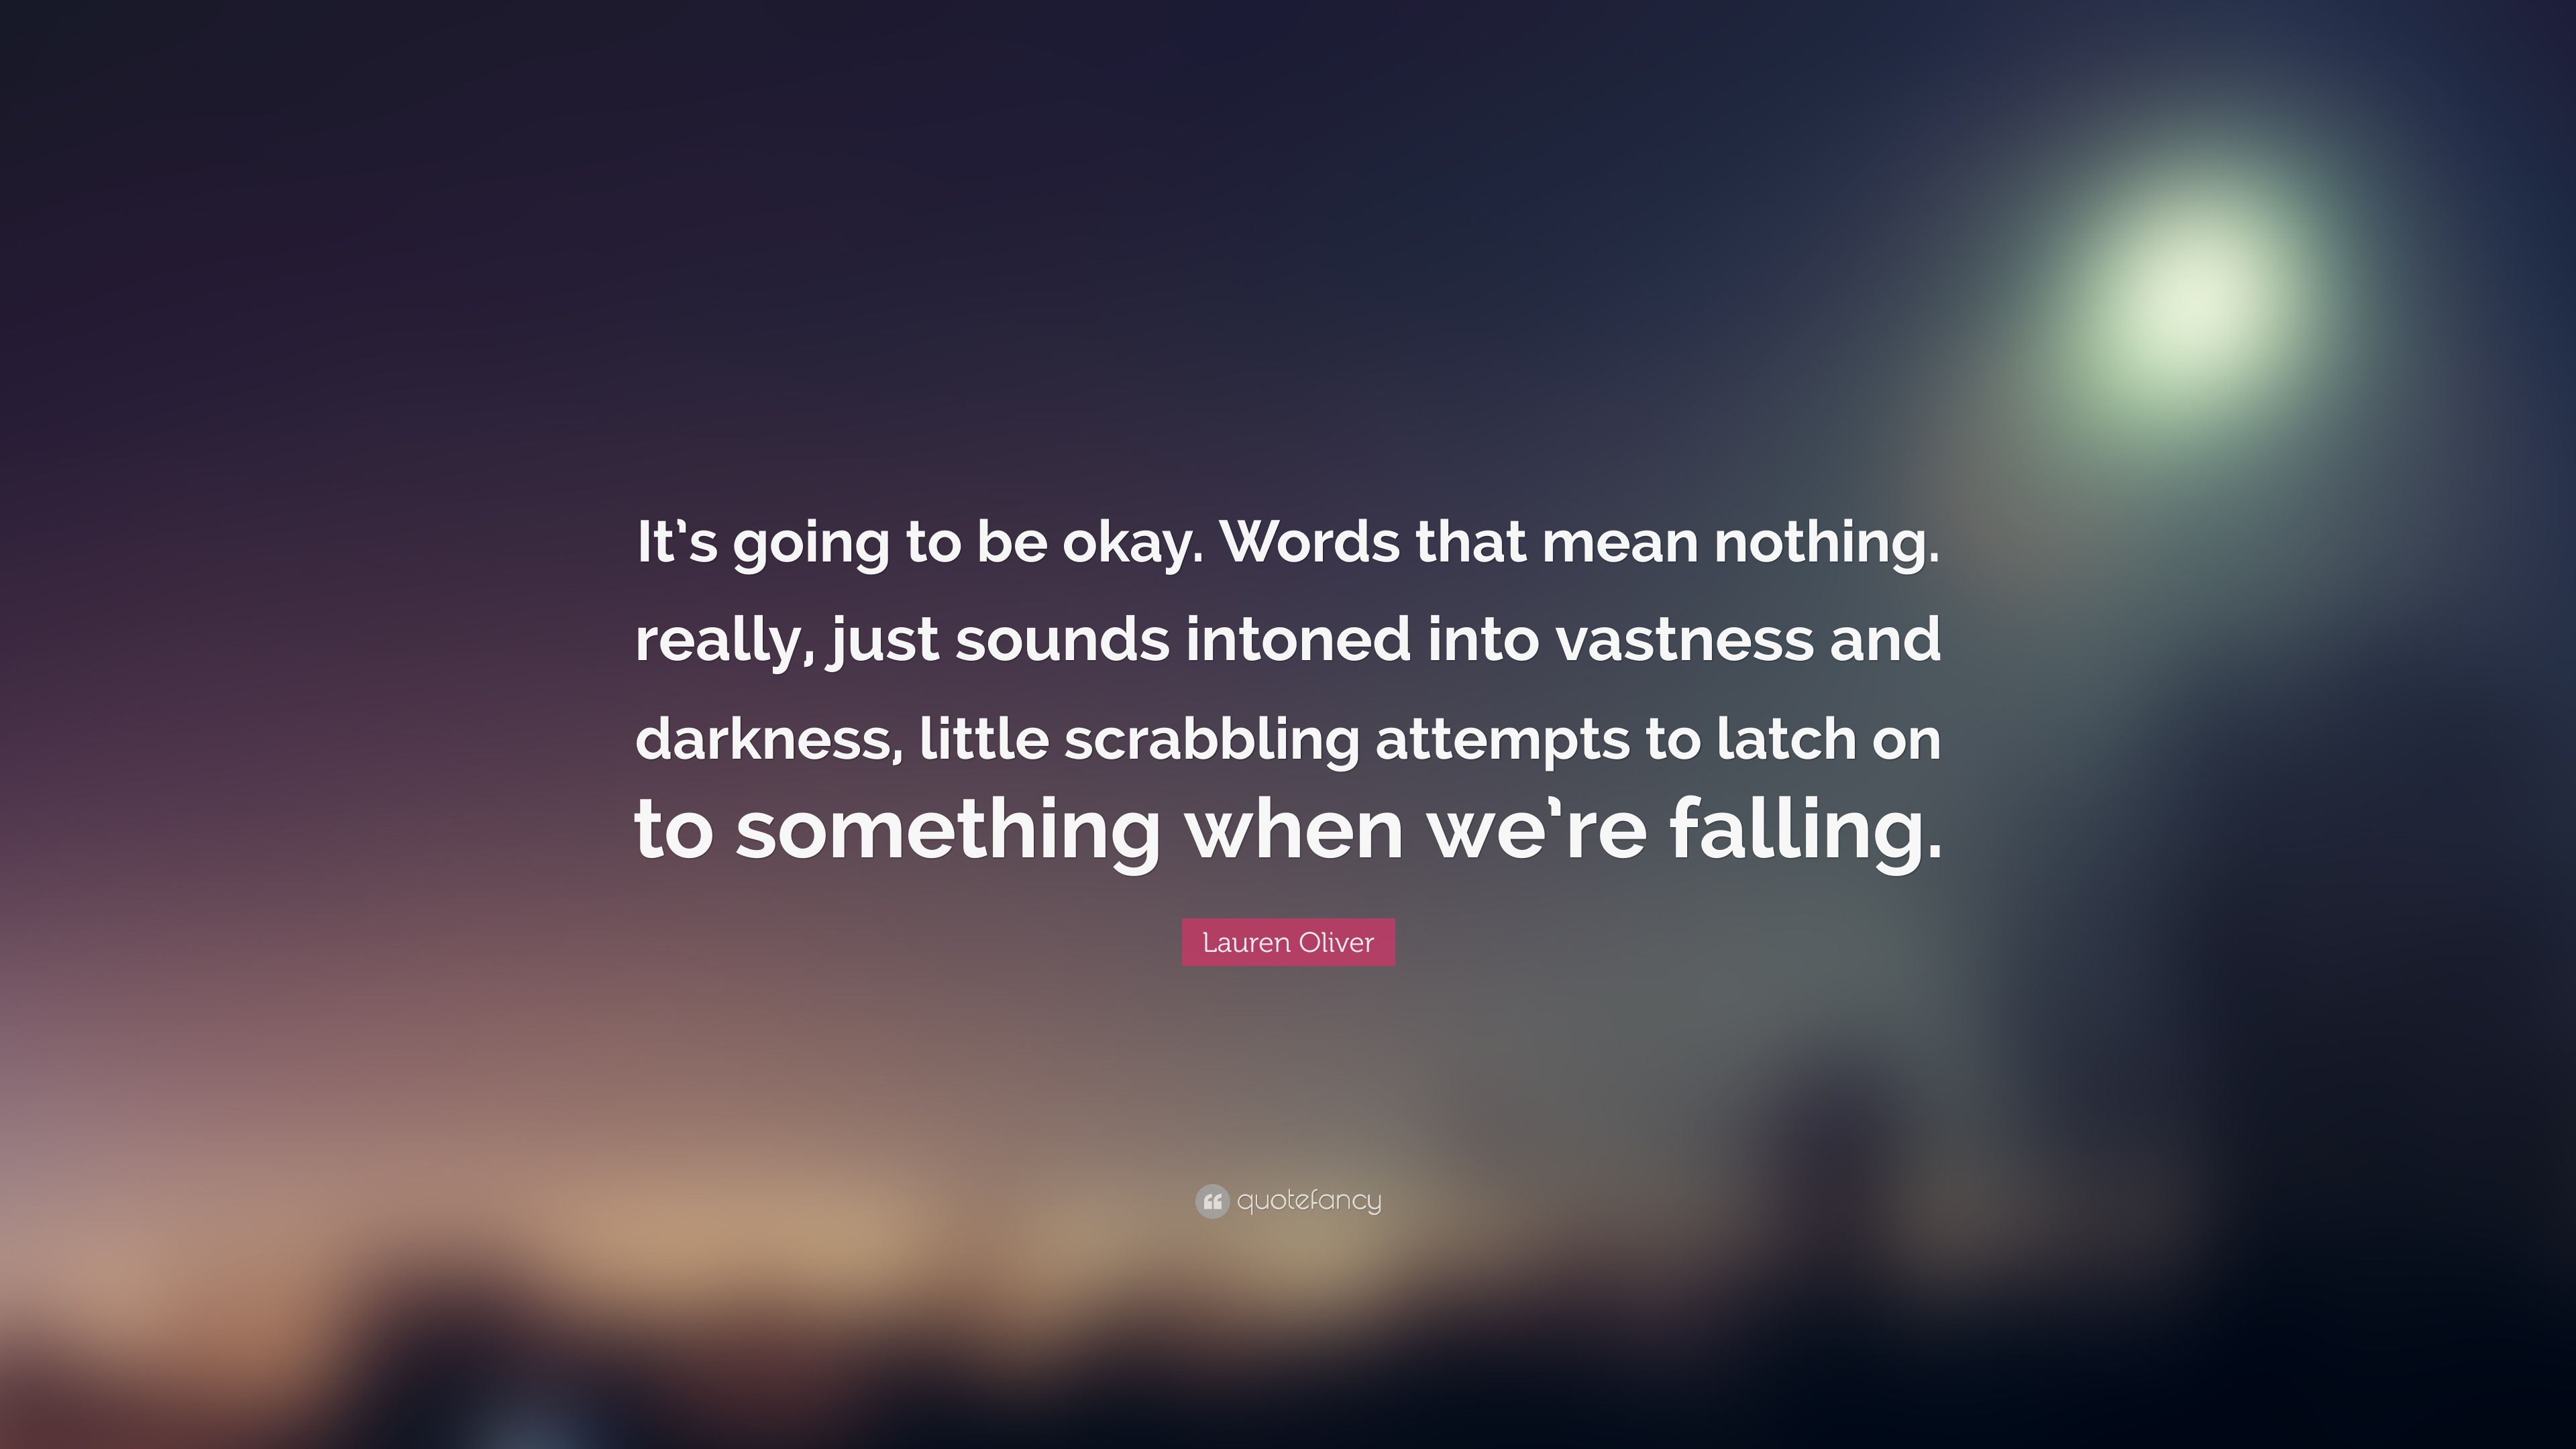 Lauren Oliver Quote: “It's Going To Be Okay. Words That Mean Nothing. Really, Just Sounds Intoned Into Vastness And Darkness, Little Scrabblin...”